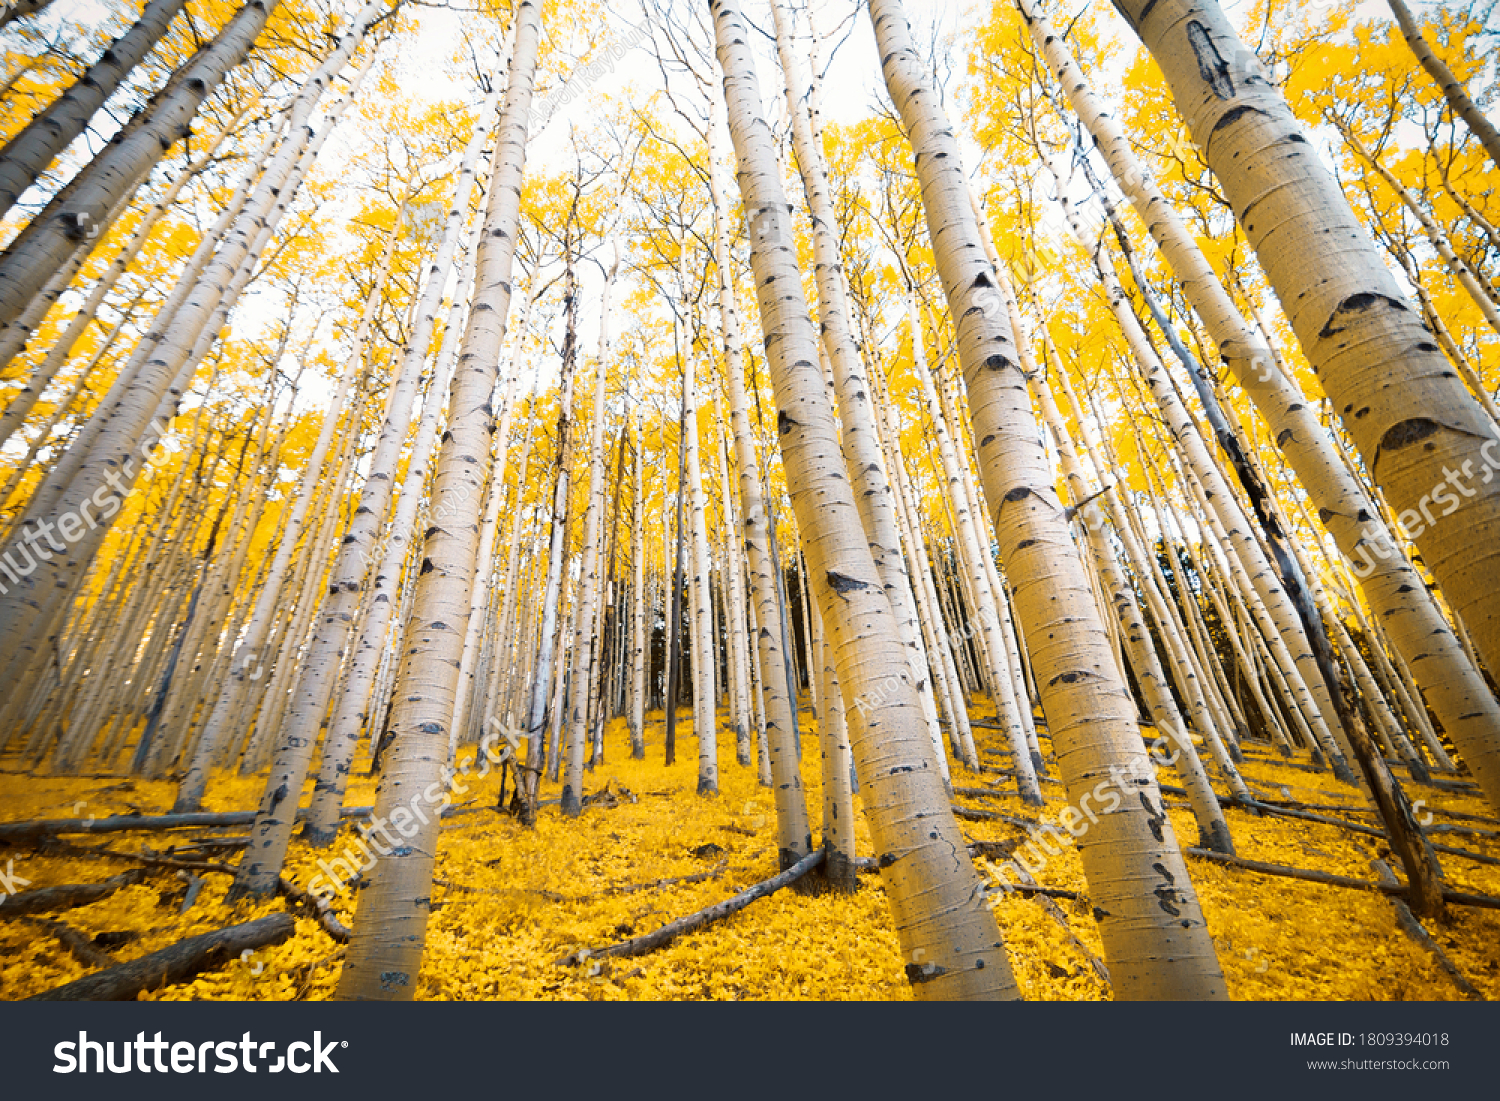 Aspen trees with golden yellow fall colors in the autumn mountains of Flagstaff, Arizona on the Inner Basin Trail #1809394018